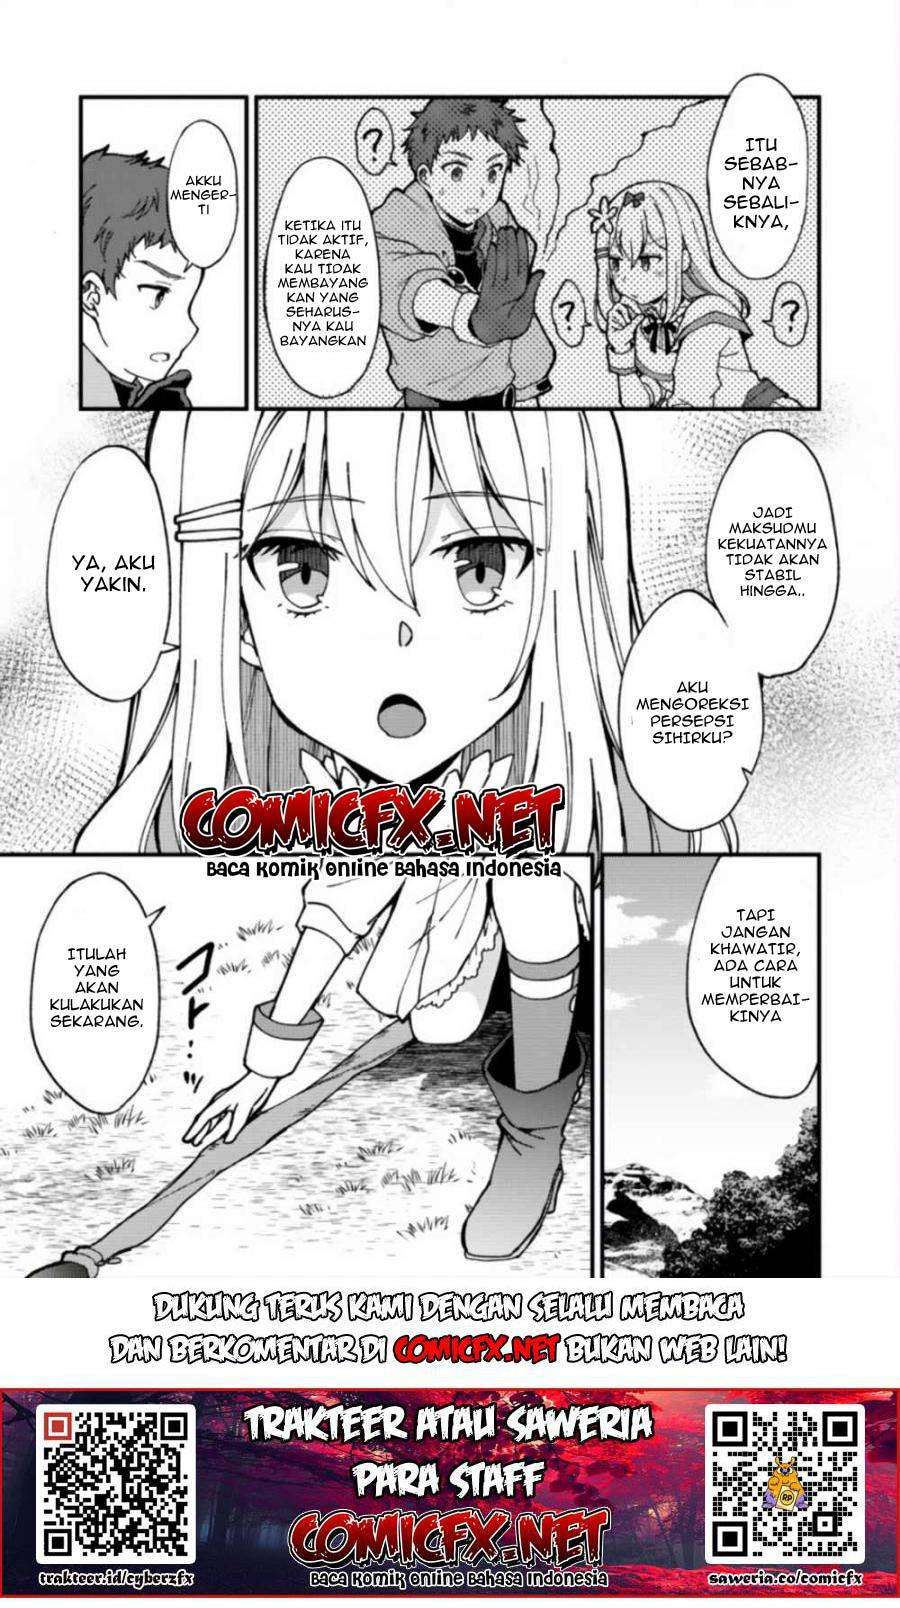 A Sword Master Childhood Friend Power Harassed Me Harshly, So I Broke off Our Relationship and Make a Fresh Start at the Frontier as a Magic Swordsman Chapter 04-2